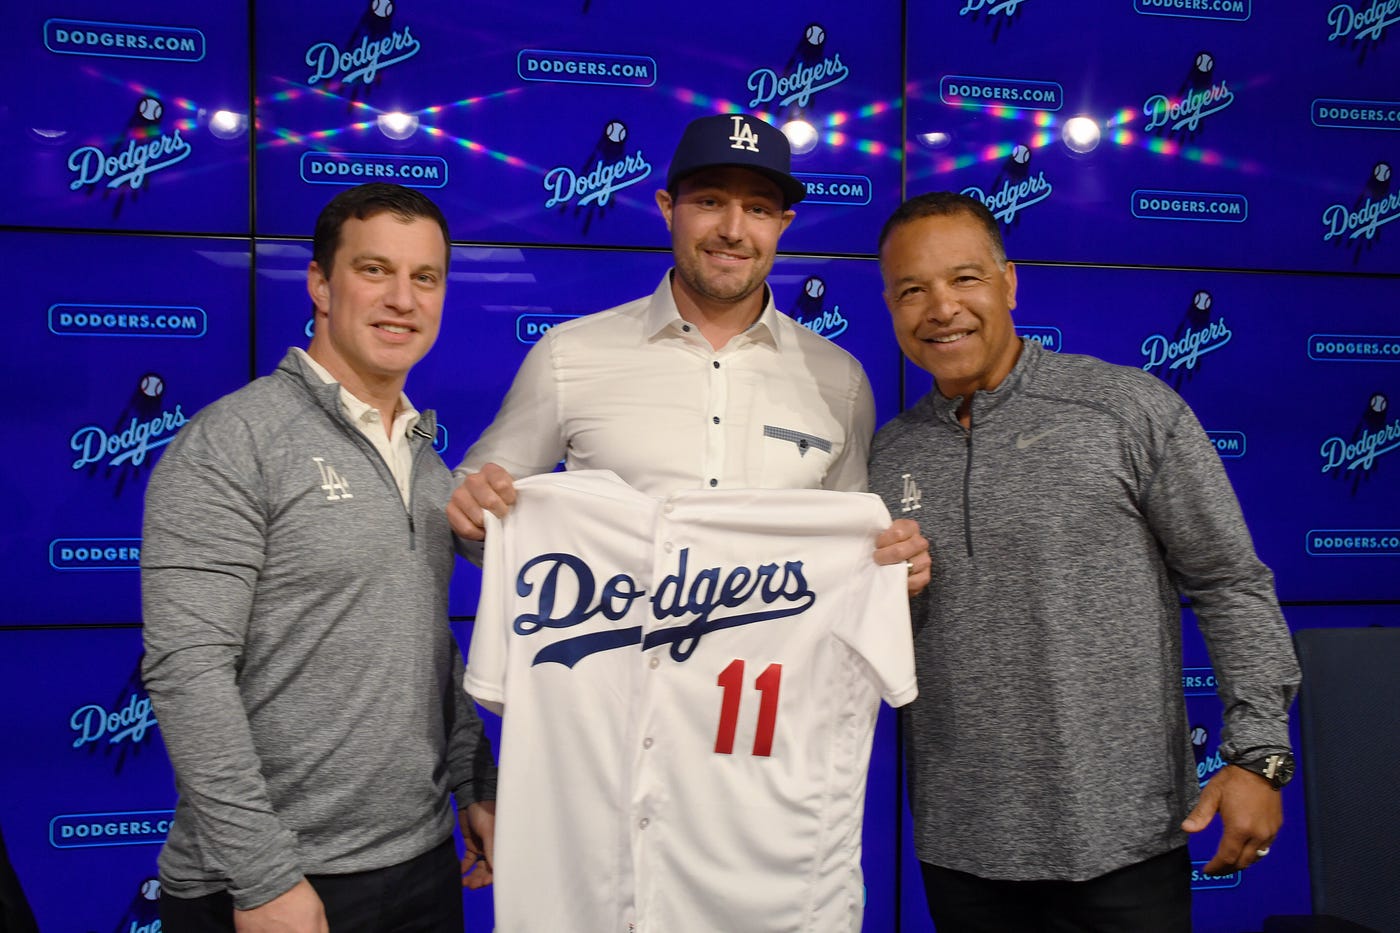 Dodgers officially announce signing of outfielder A.J. Pollock, by Cary  Osborne